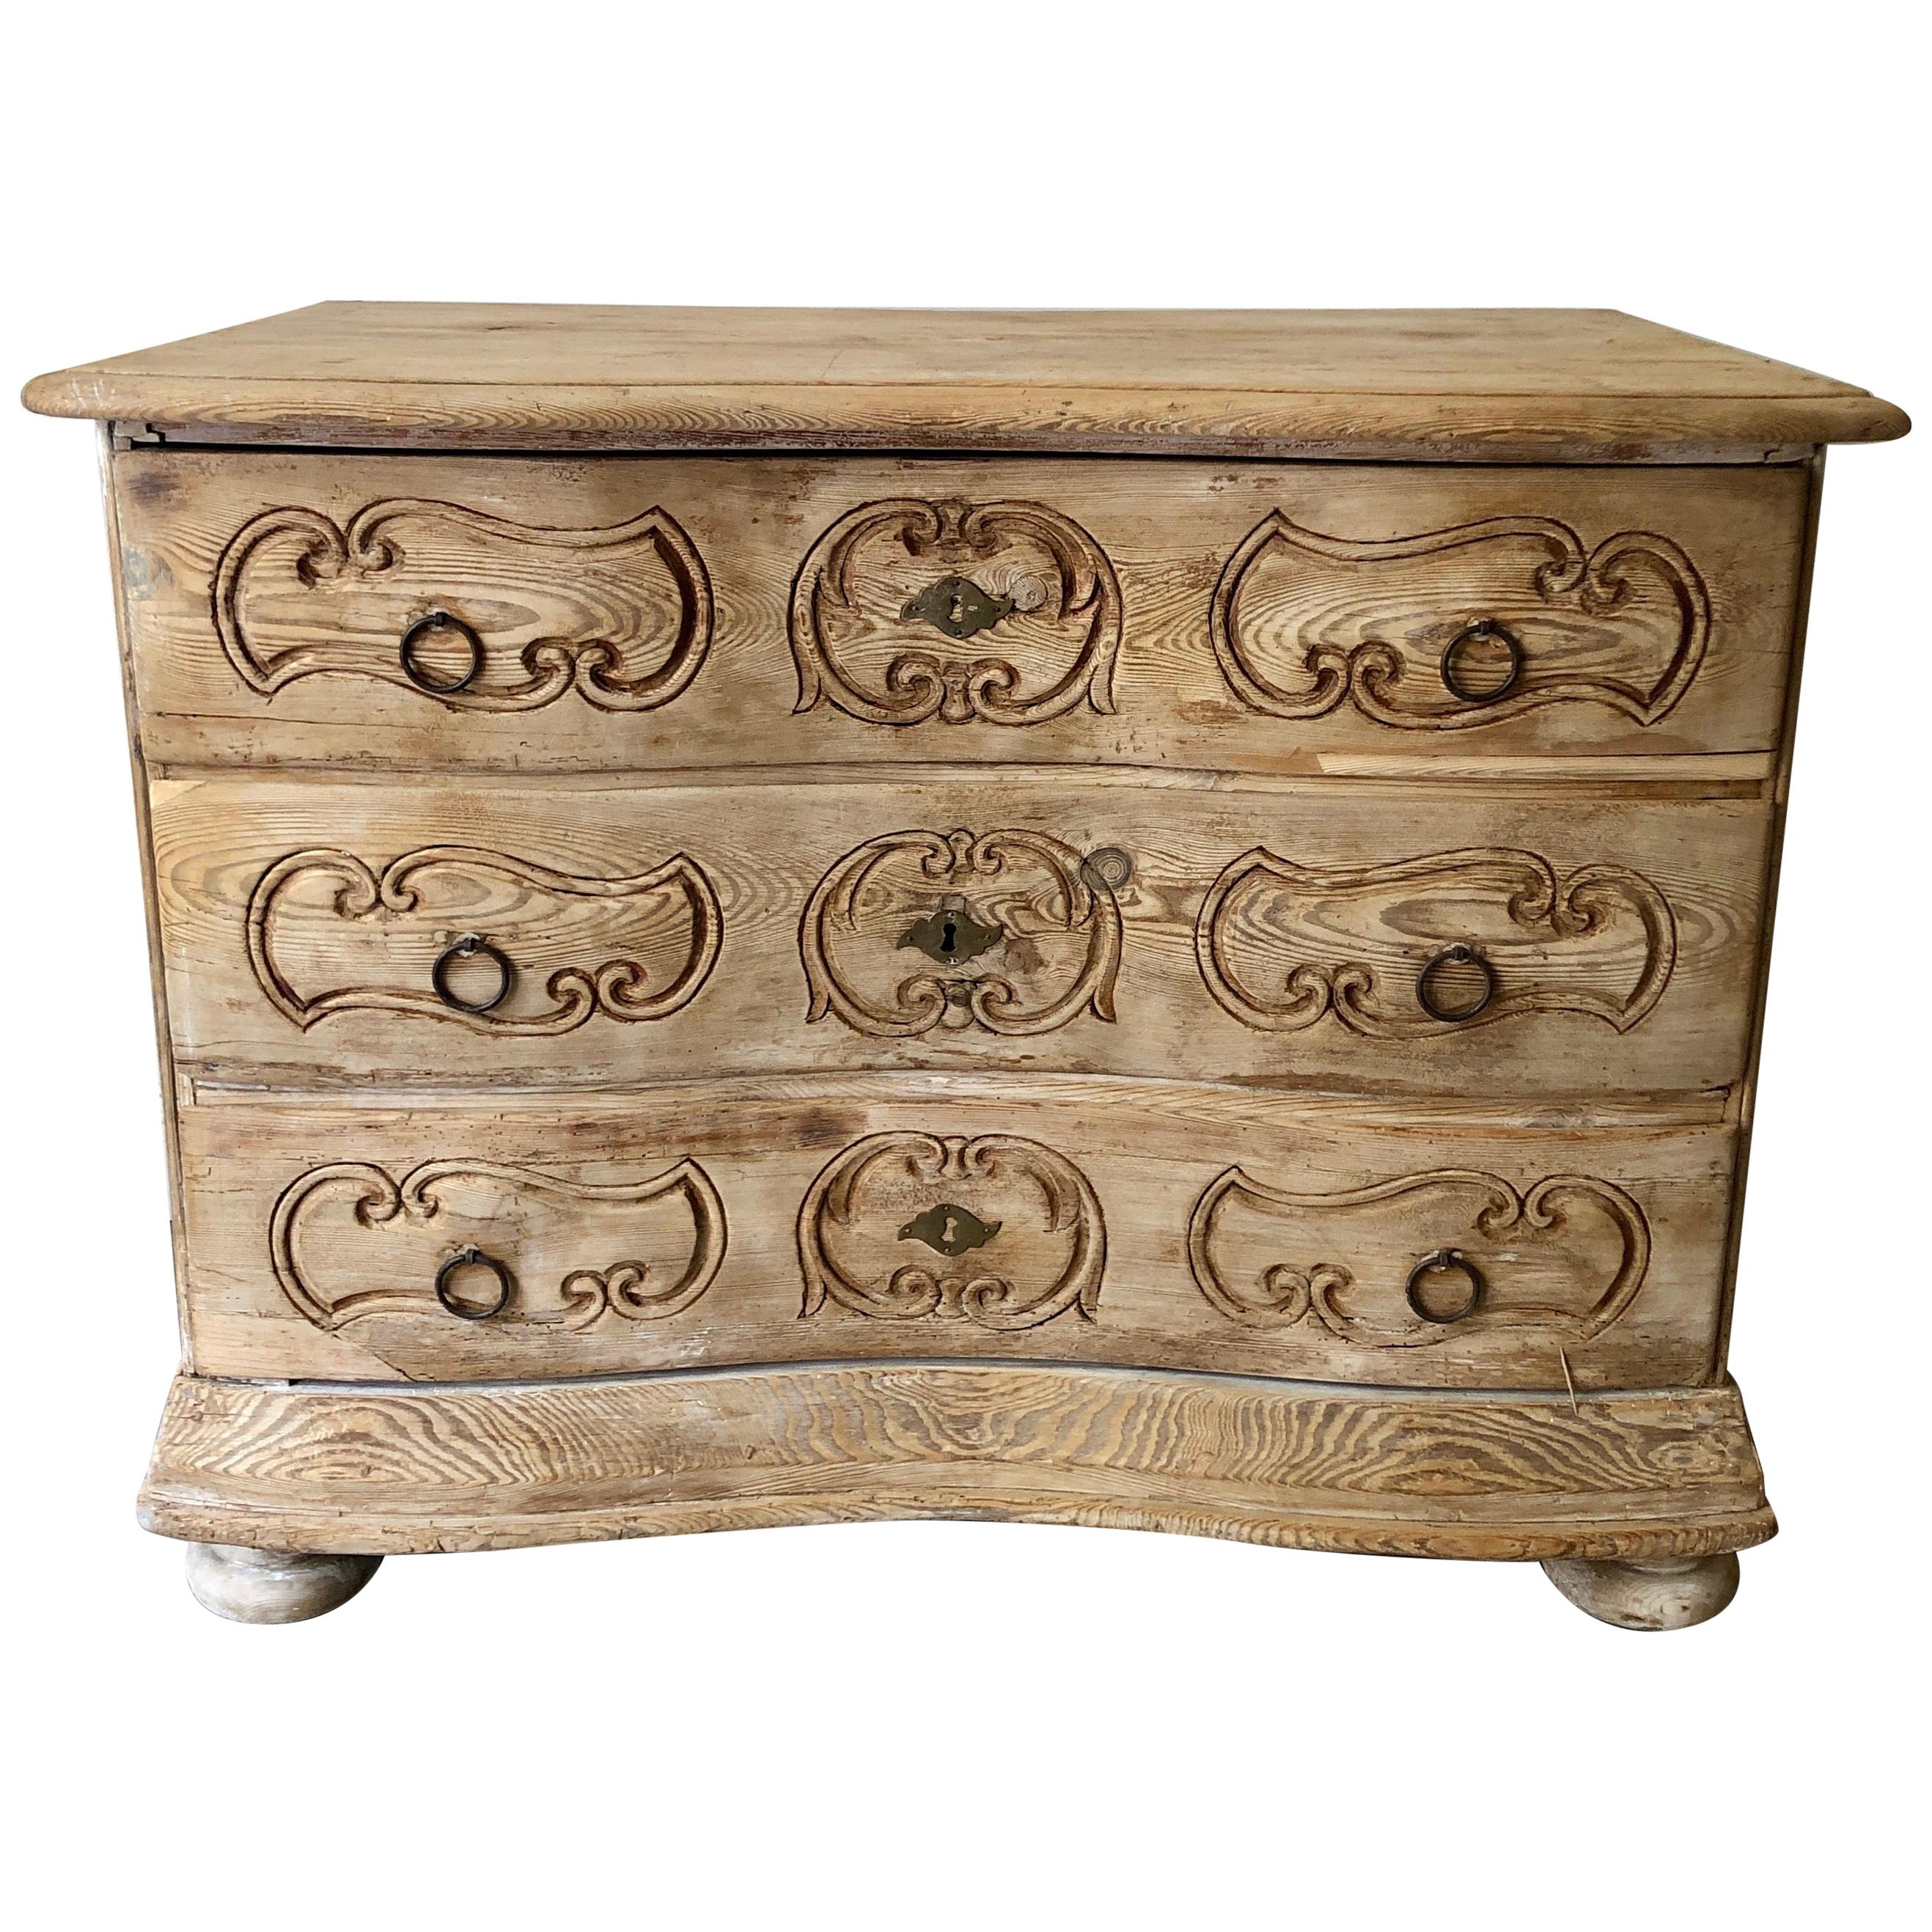 Early 19th Century Baroque Style Chest of Drawers